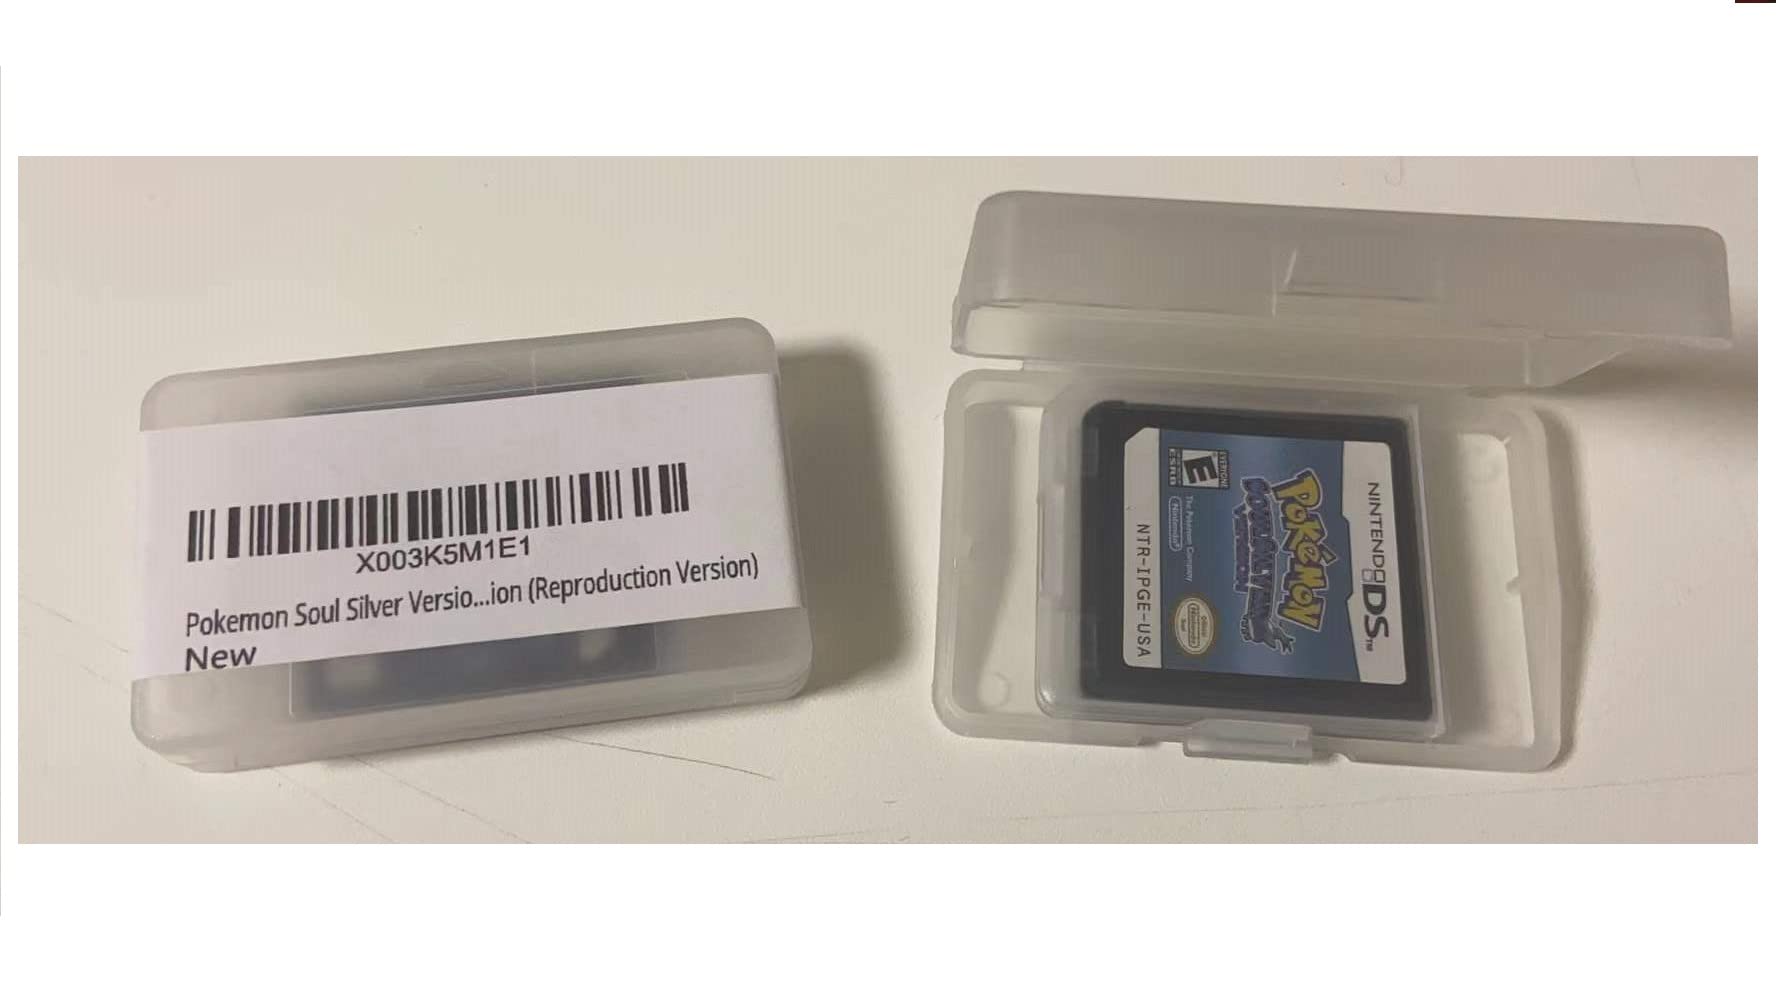 Pokemon Soul Silver Version Game Card Compatible with Nintendo DS/NDS/NDSL/NDSi/3DS/2DS Version (Reproduction Version)